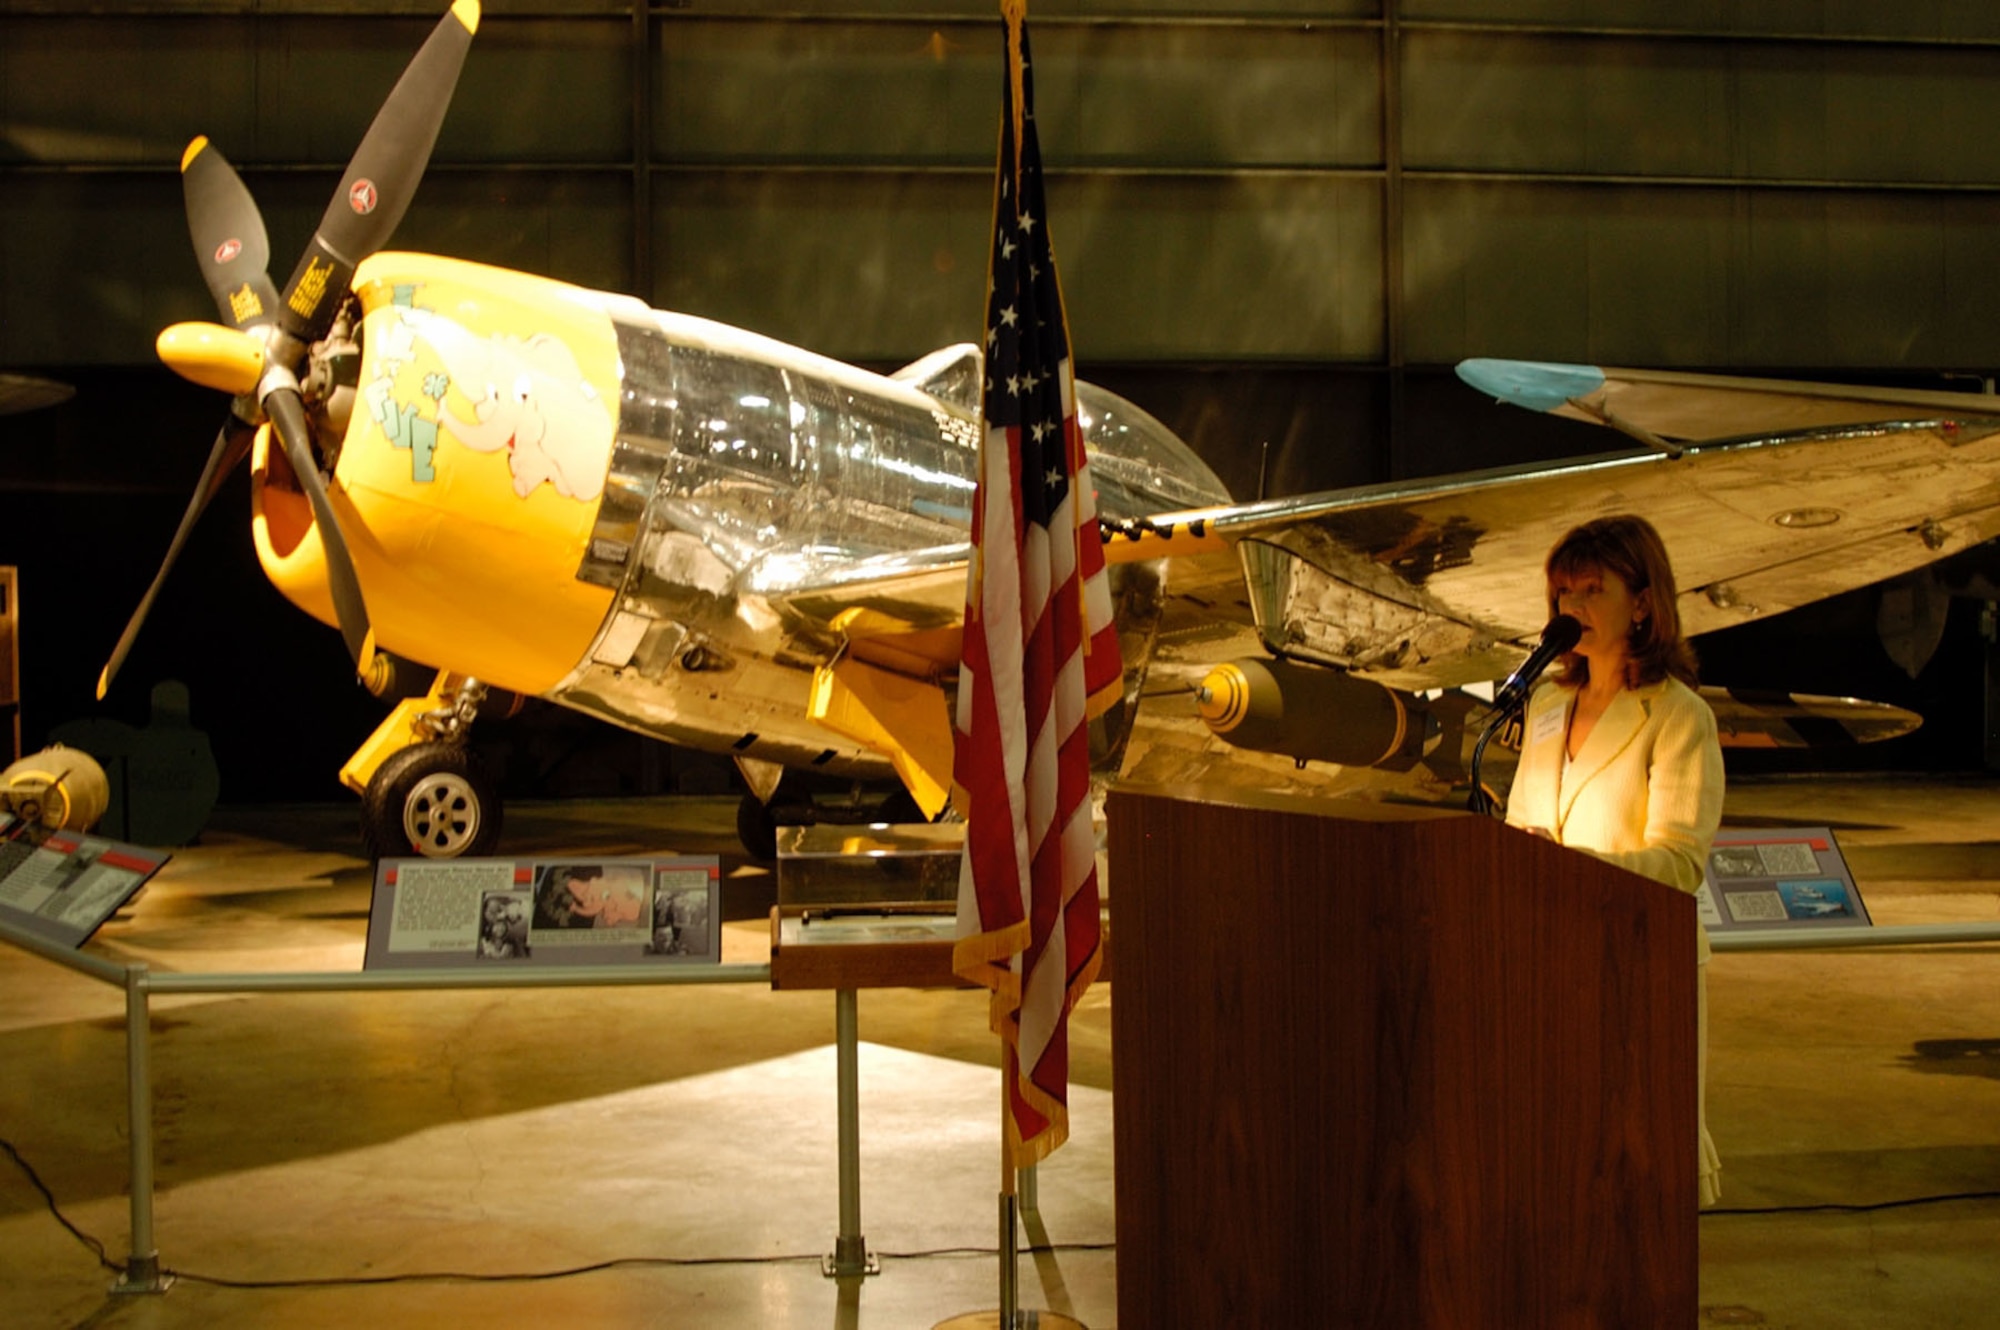 DAYTON, Ohio (8/24/06) -- Kelly Rooker speaks during the P-47D unveiling at the National Museum of the United States Air Force. The restored P-47D was marked by the museum's restoration staff to represent the aircraft flown by her father, Col. Joseph Laughlin, commander of the 362nd Fighter Group, 9th Air Force, during combat operations in Europe in early 1945. (U.S. Air Force photo by Jeff Fisher)